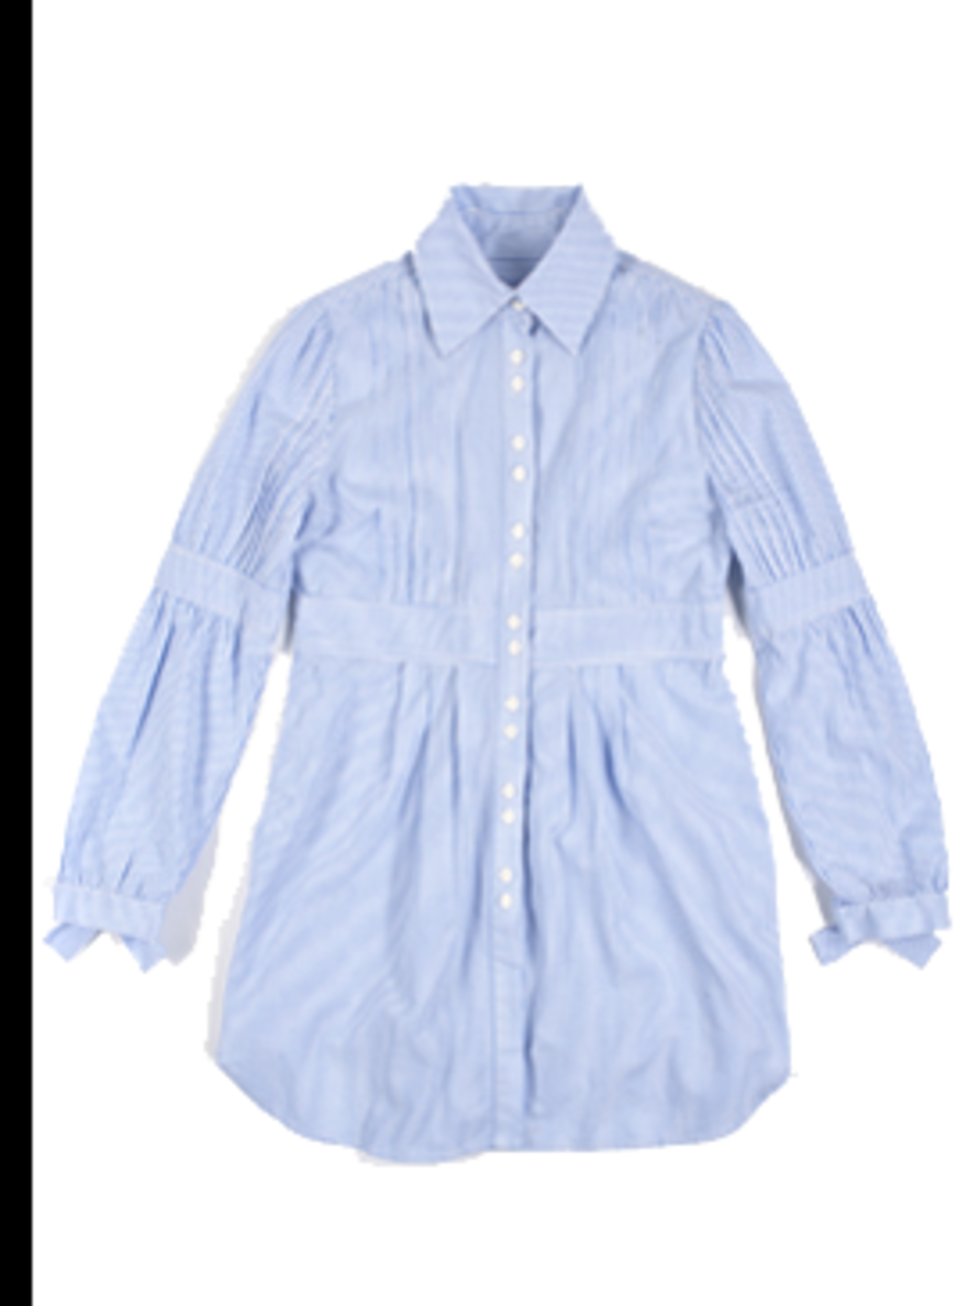 <p>Stripe shirt dress, £85 from Ted Baker for stockists call 0845 130 4278</p>